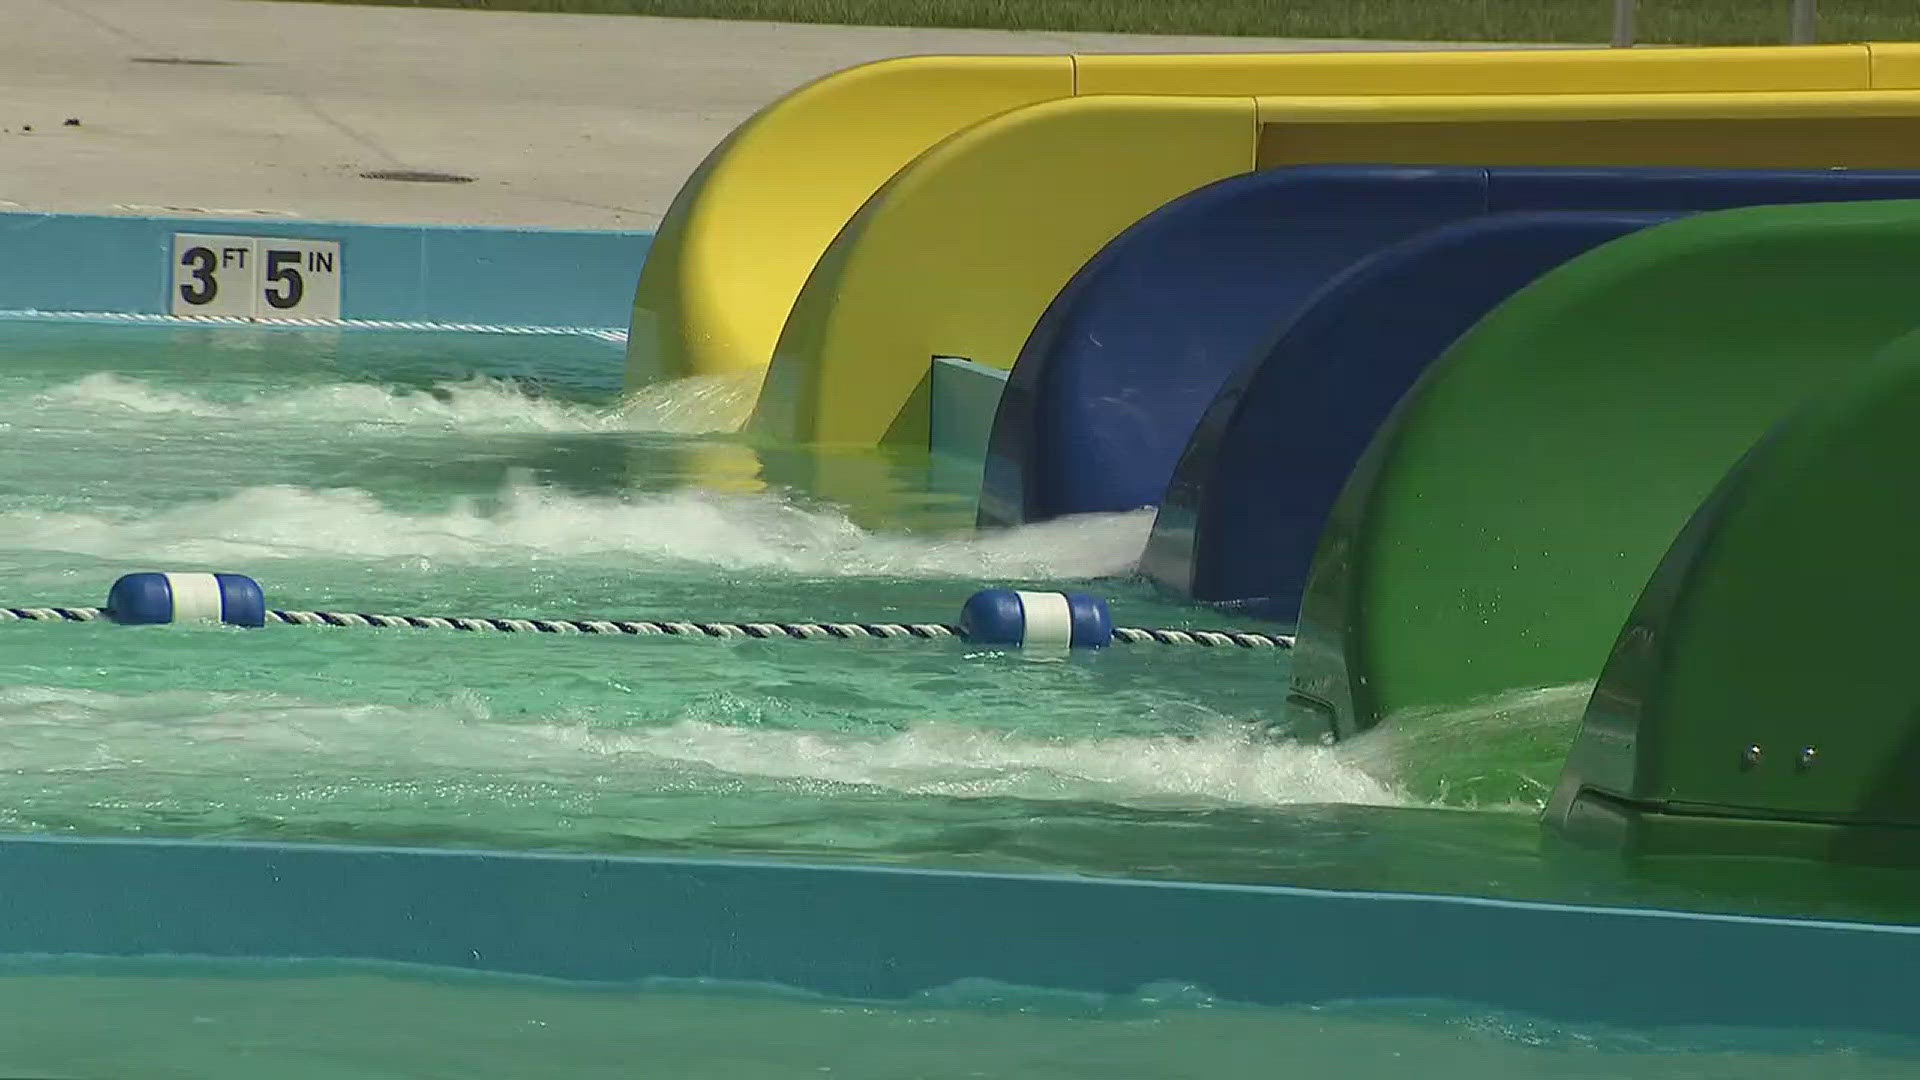 Moline's new and improved waterpark will open on Saturday, May 25 at noon.